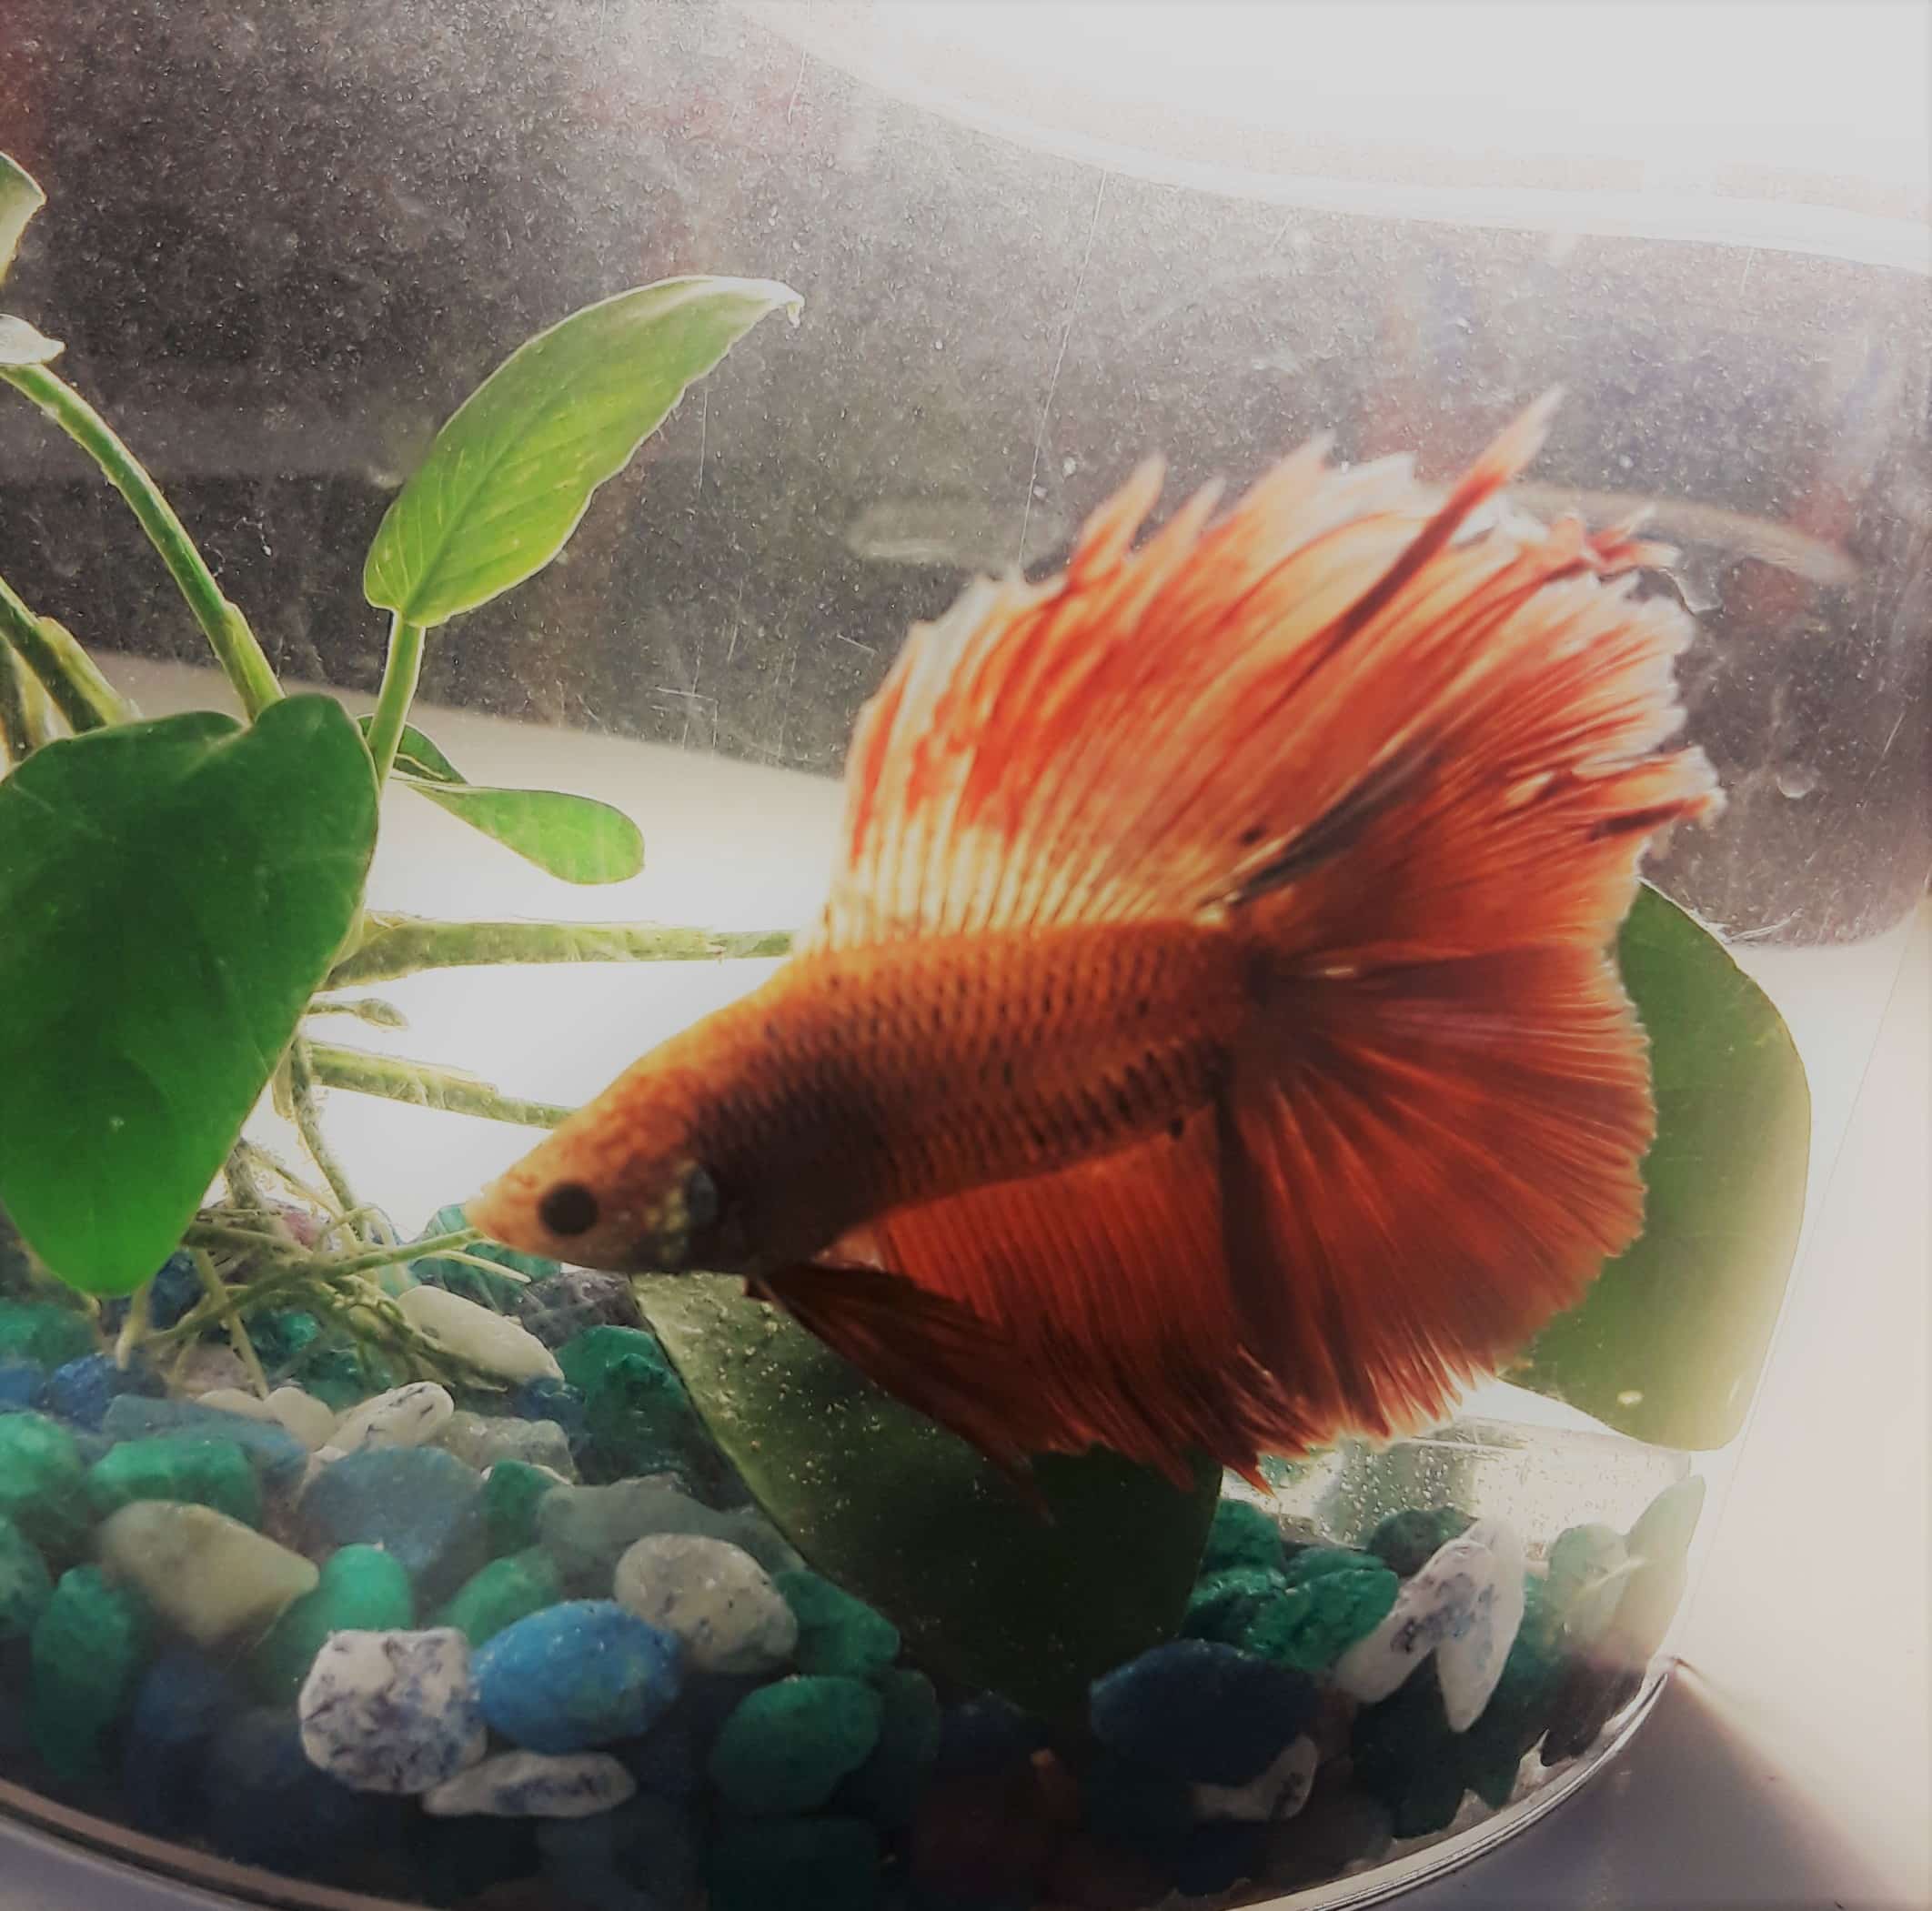 NGU students arent allowed cats or dogs on campus, but they can have fish. This is freshman Chloe Watsons beta fish, Taco.